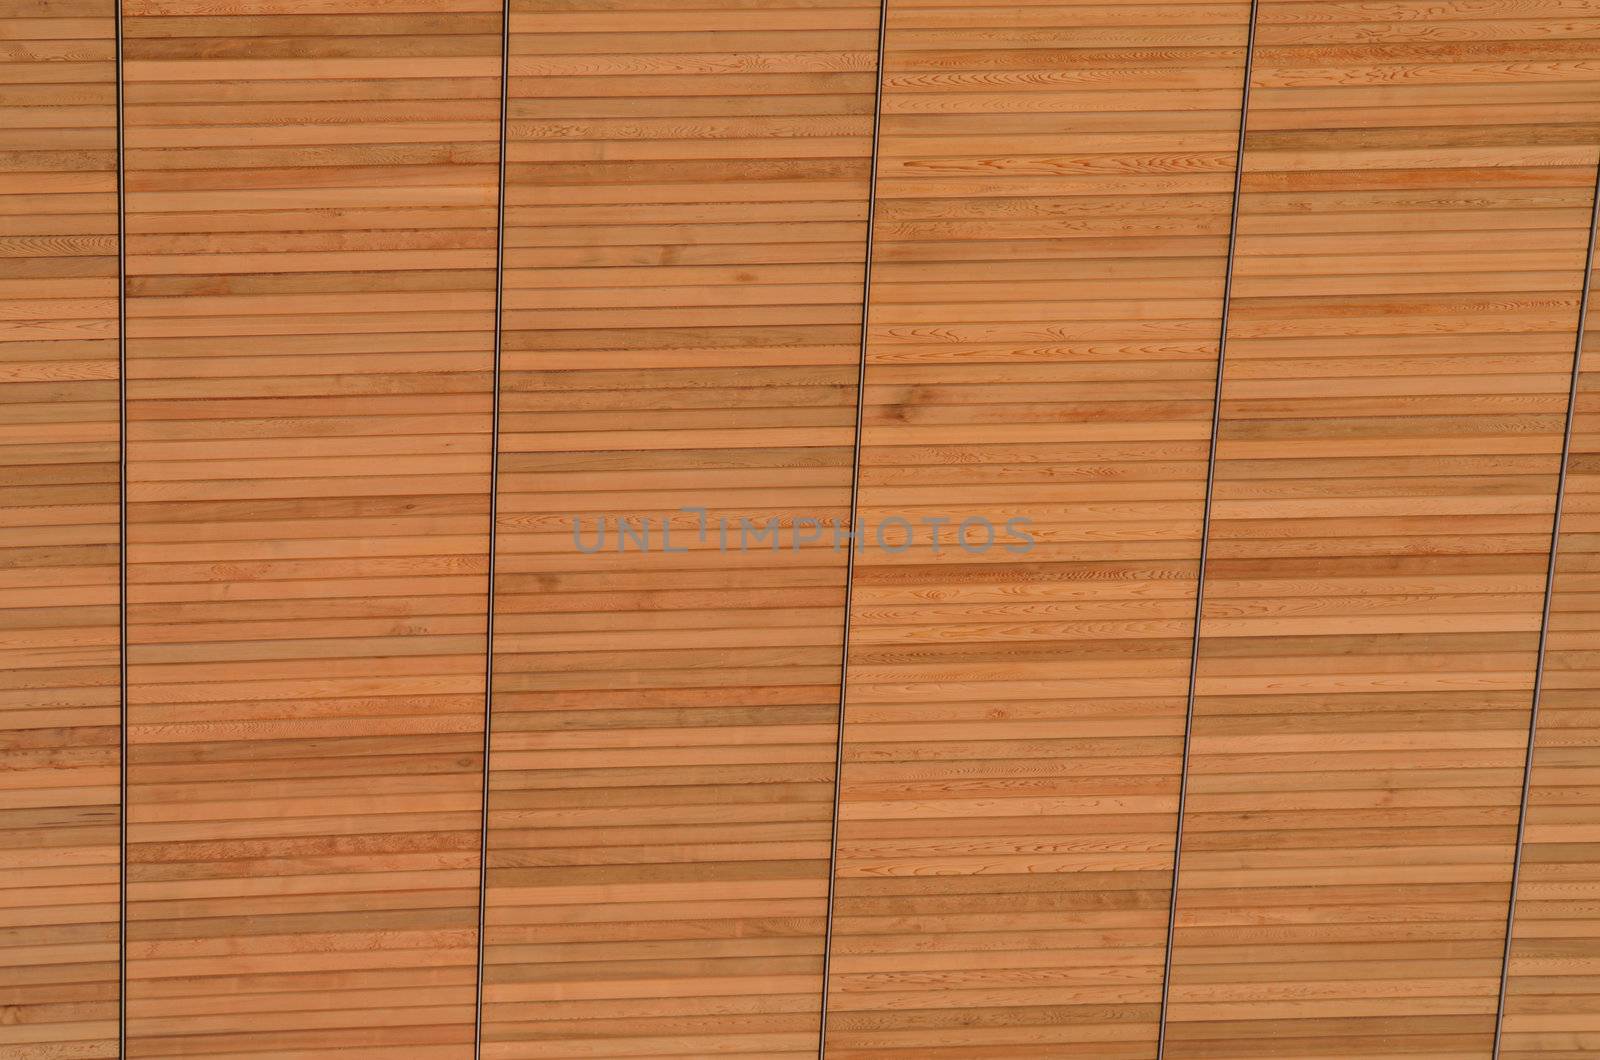 Wooden pattern in architecture